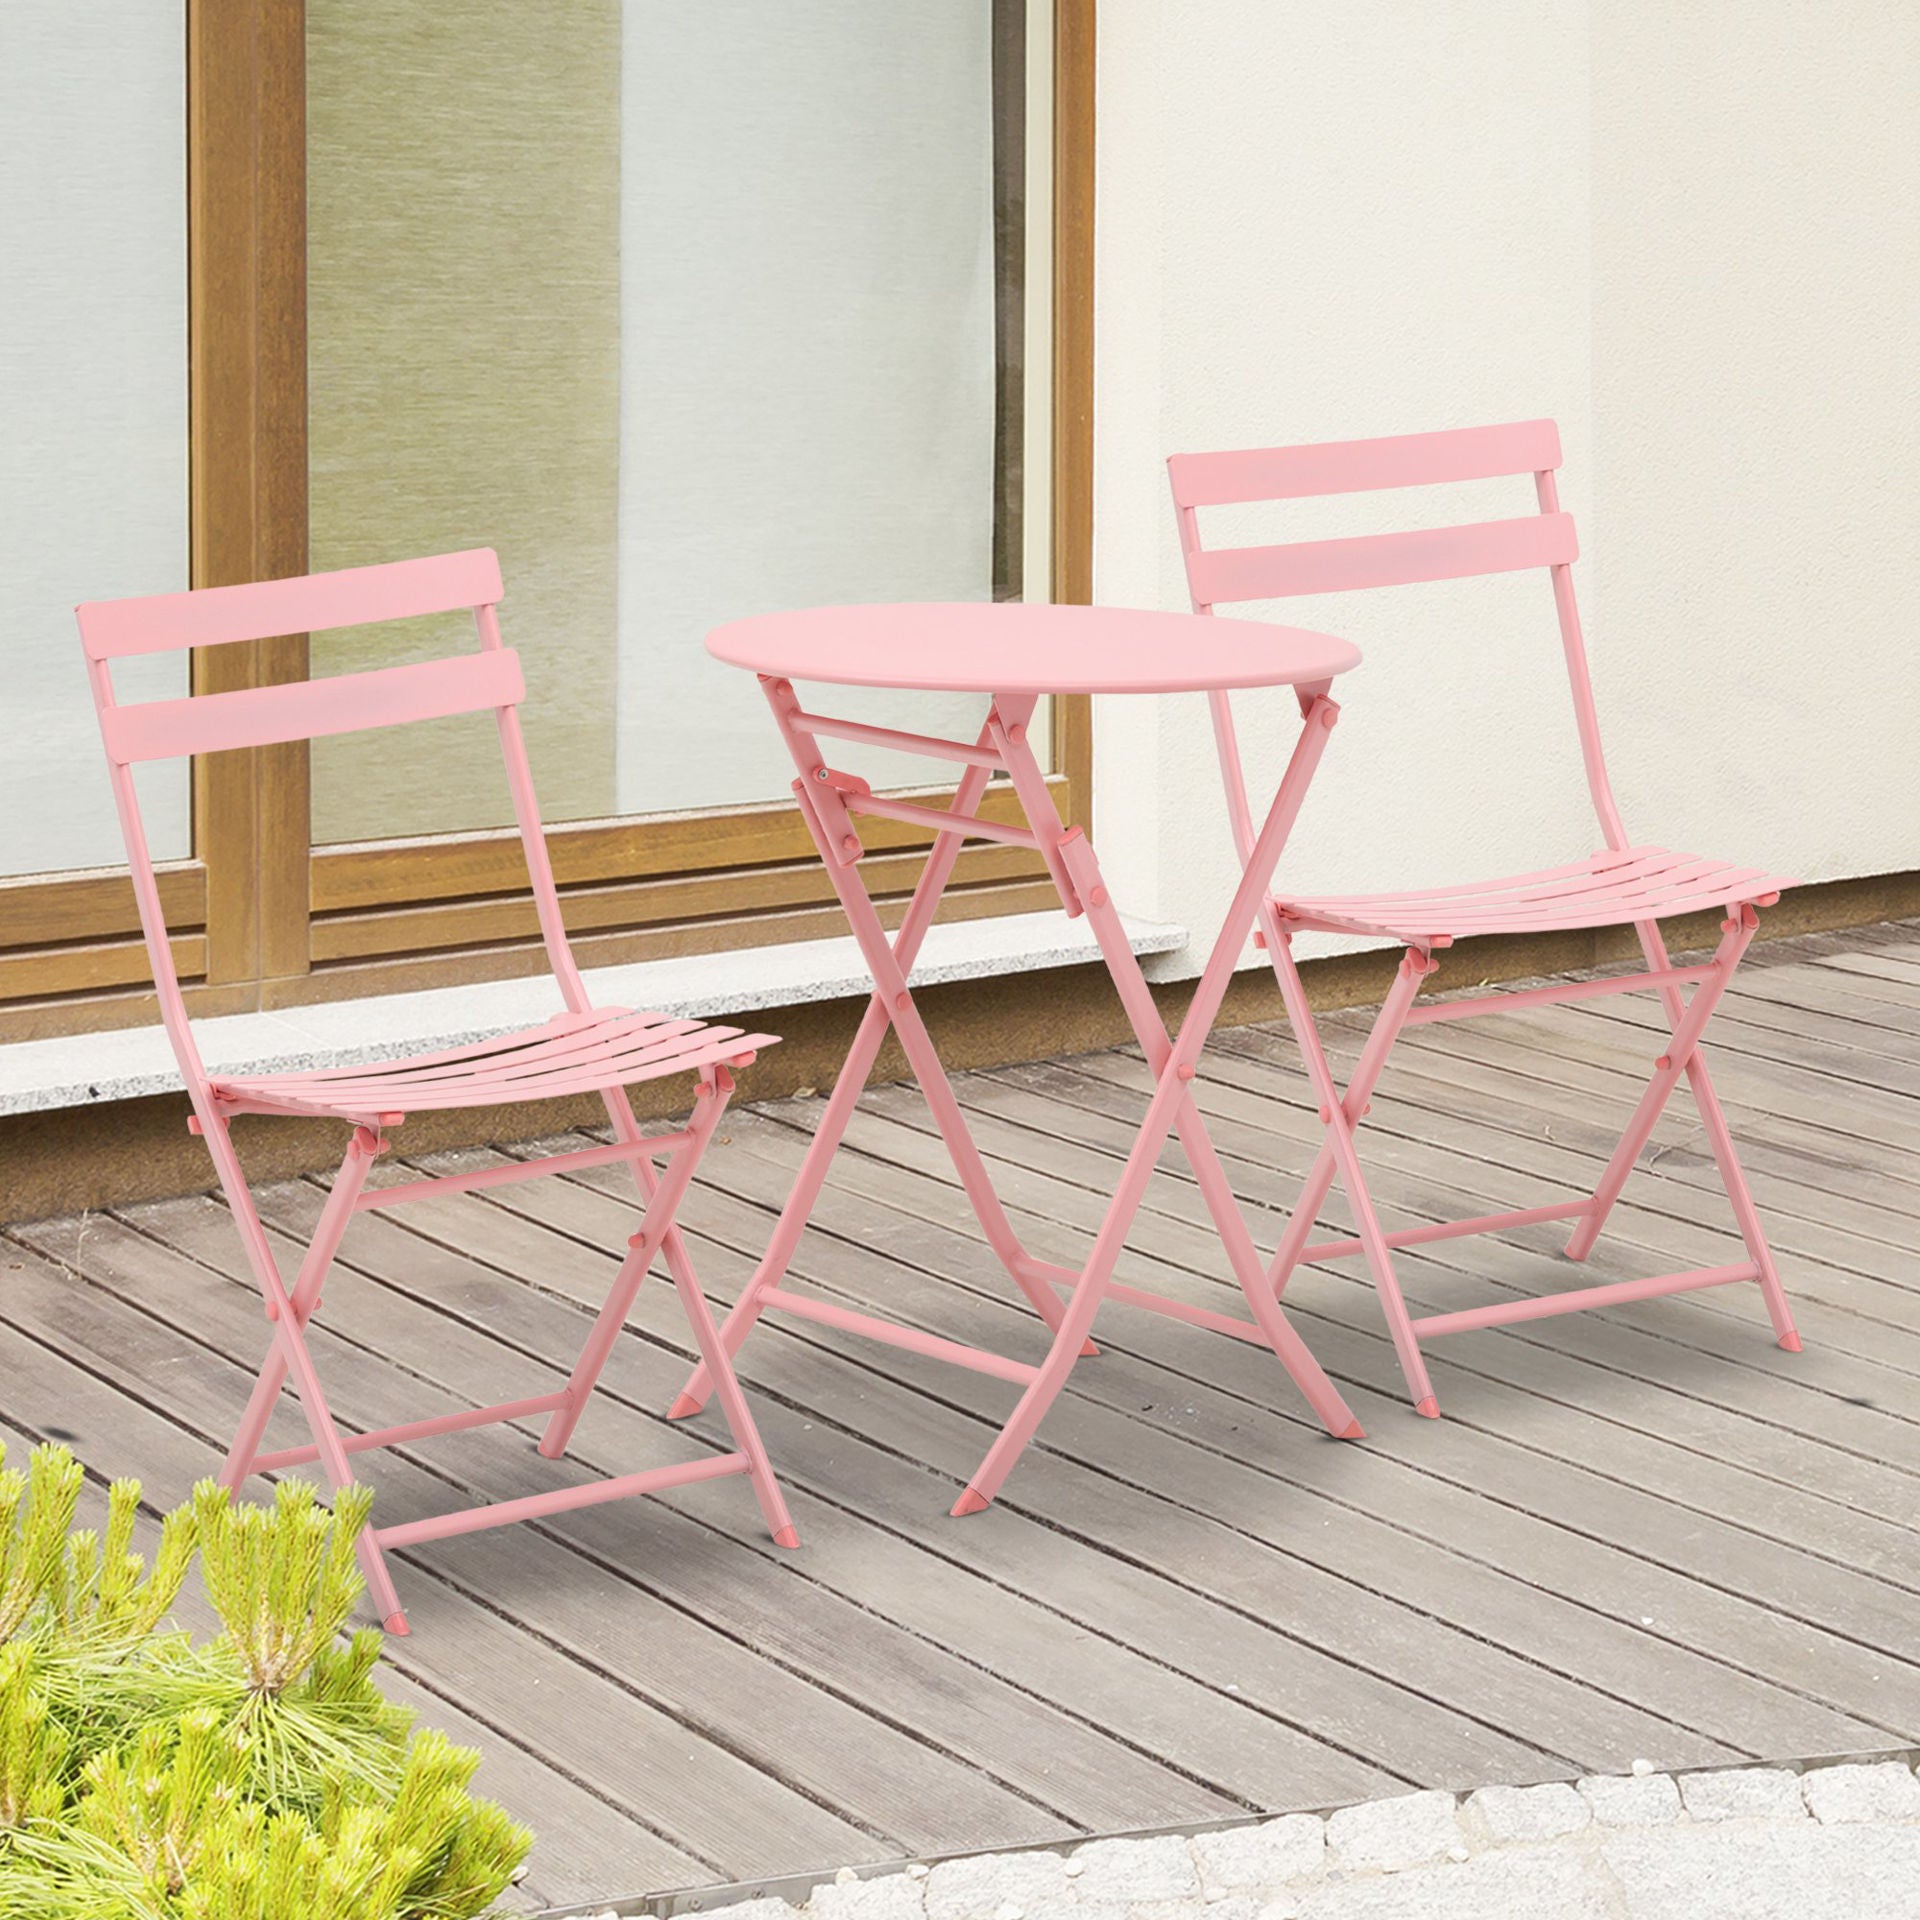 Nancy's Bridge Bay Garden set for 2 people Balcony furniture set Bistro table with 2 chairs for indoor garden foldable Pink